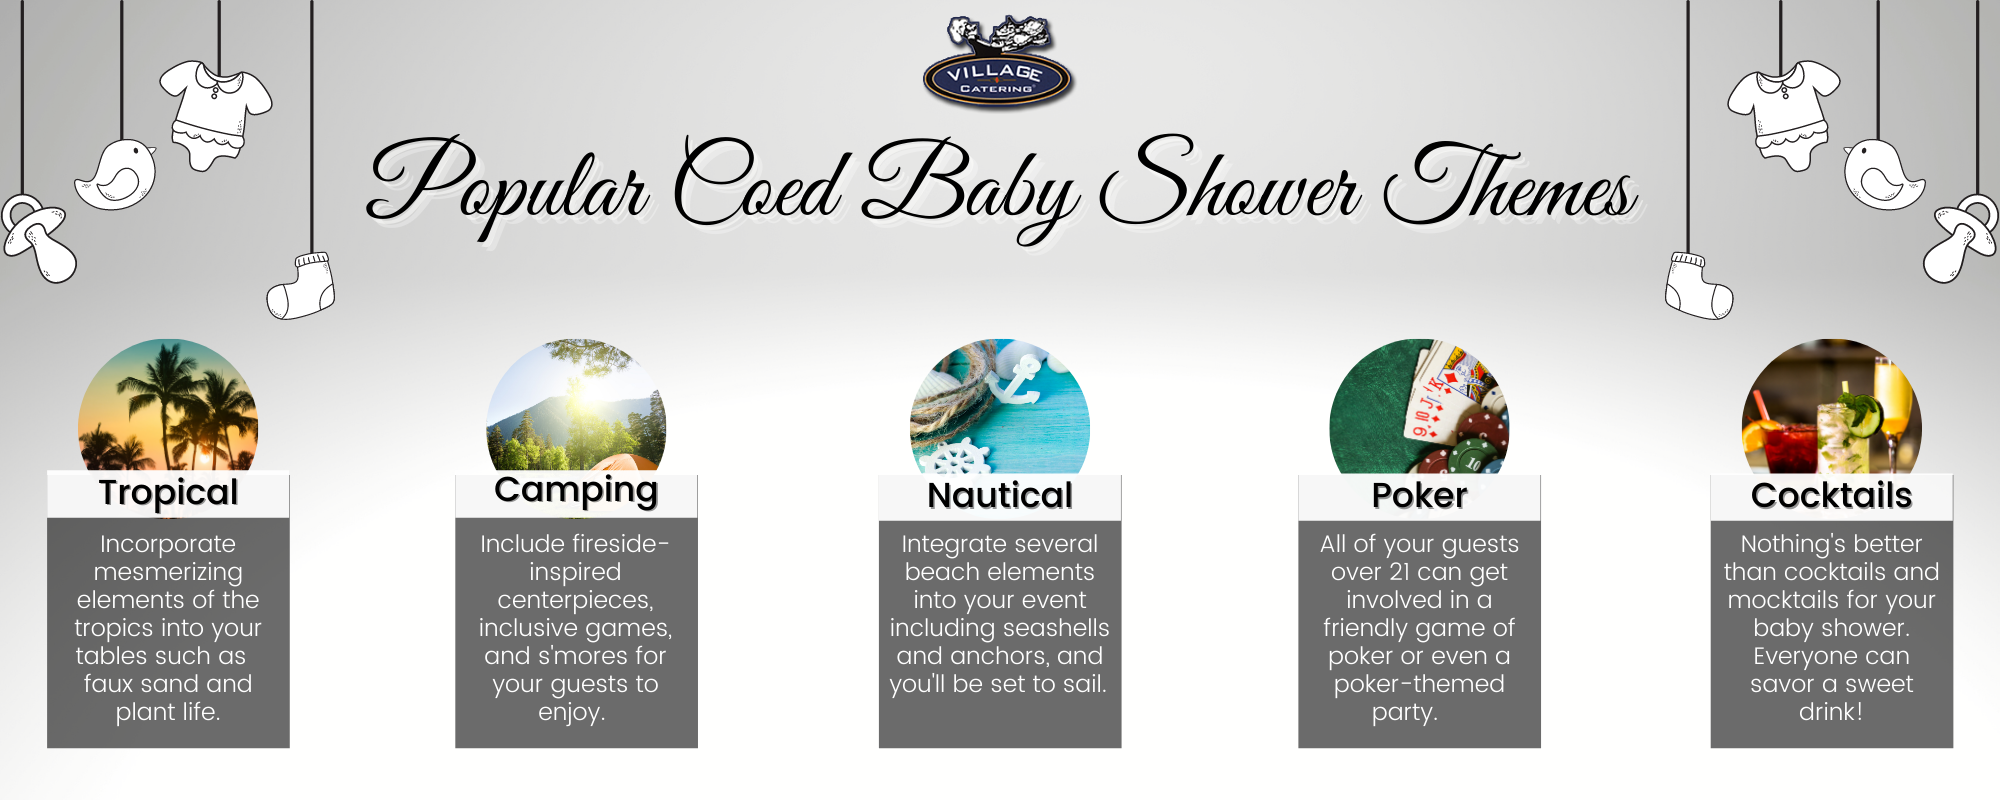 Popular Coed Baby Shower Themes by Village Catering Infographic